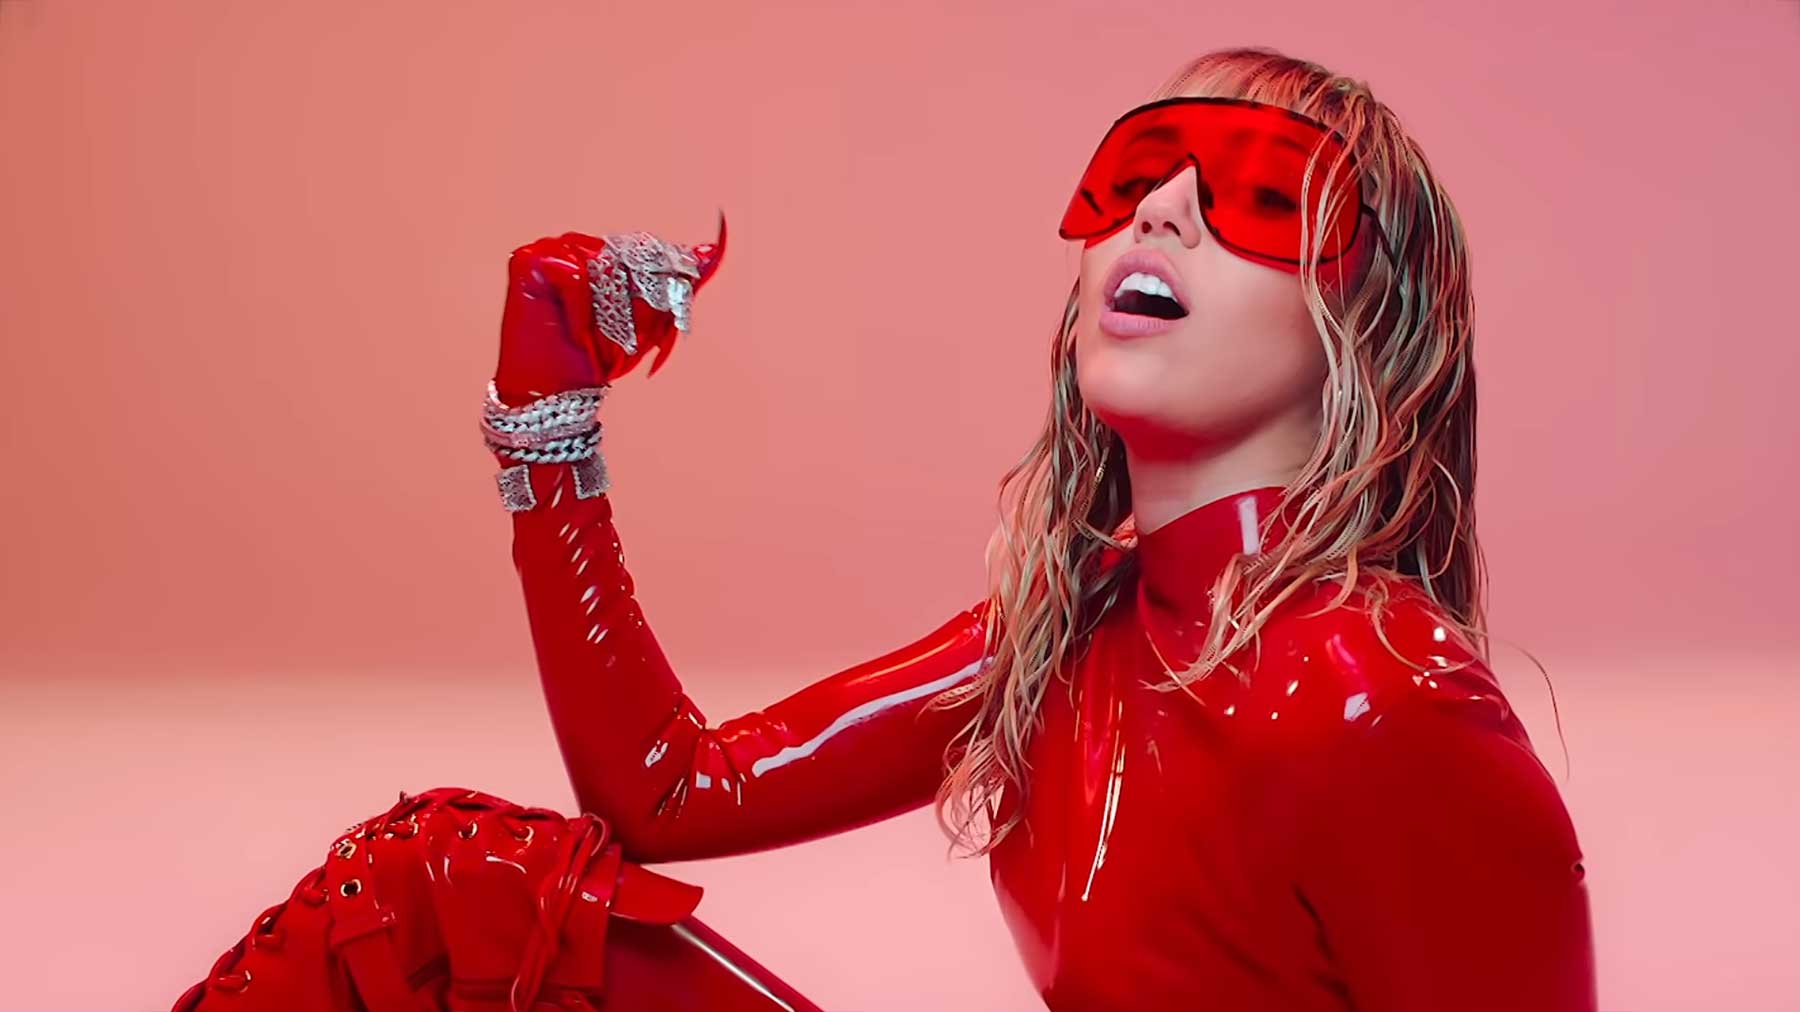 Don’t fuck with us! – Analyse zu Miley Cyrus‘ neuem Musikvideo